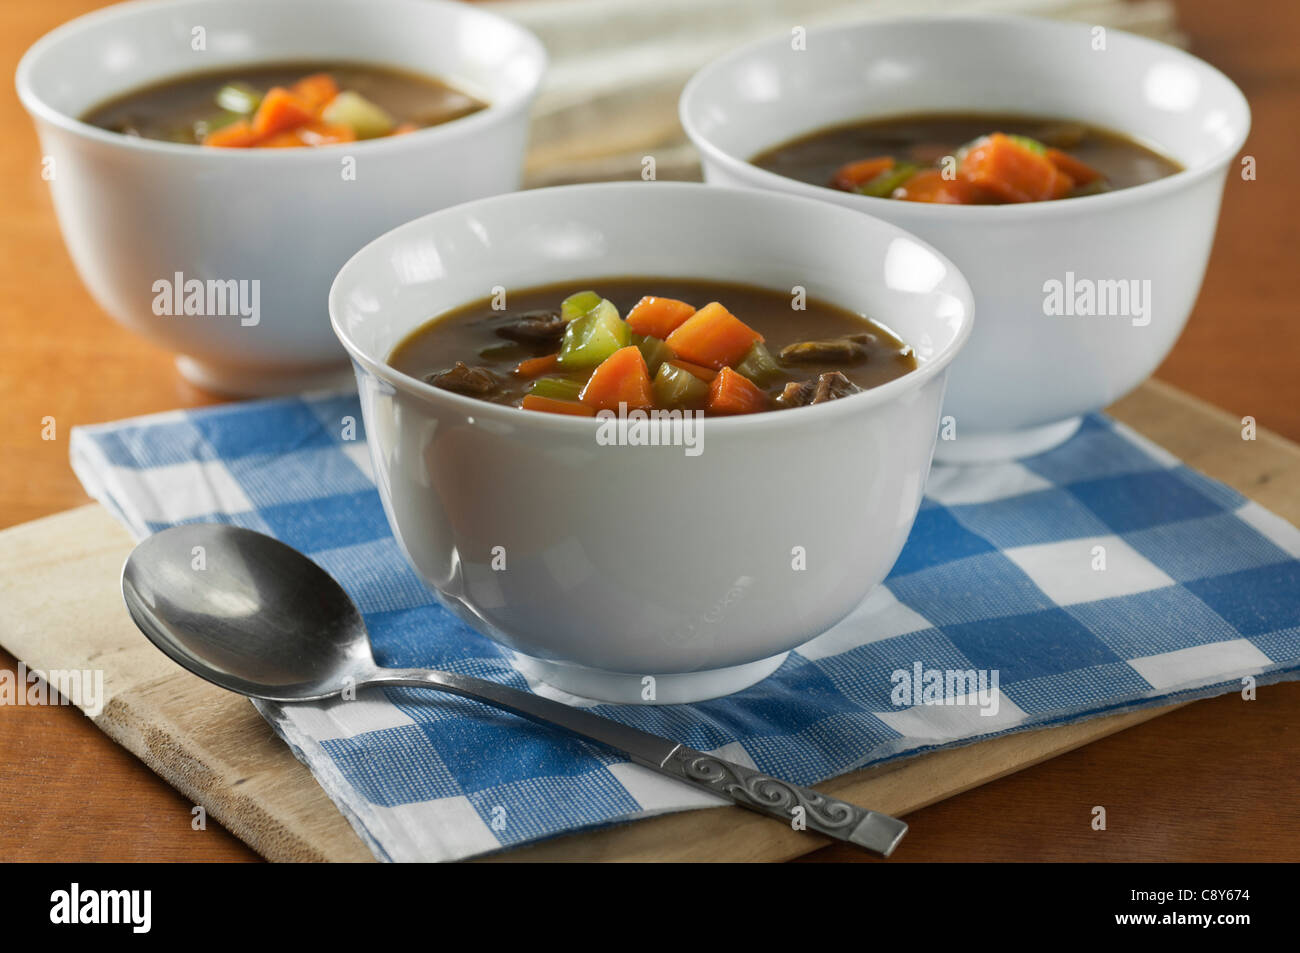 Oxtail soup in white bowls Stock Photo